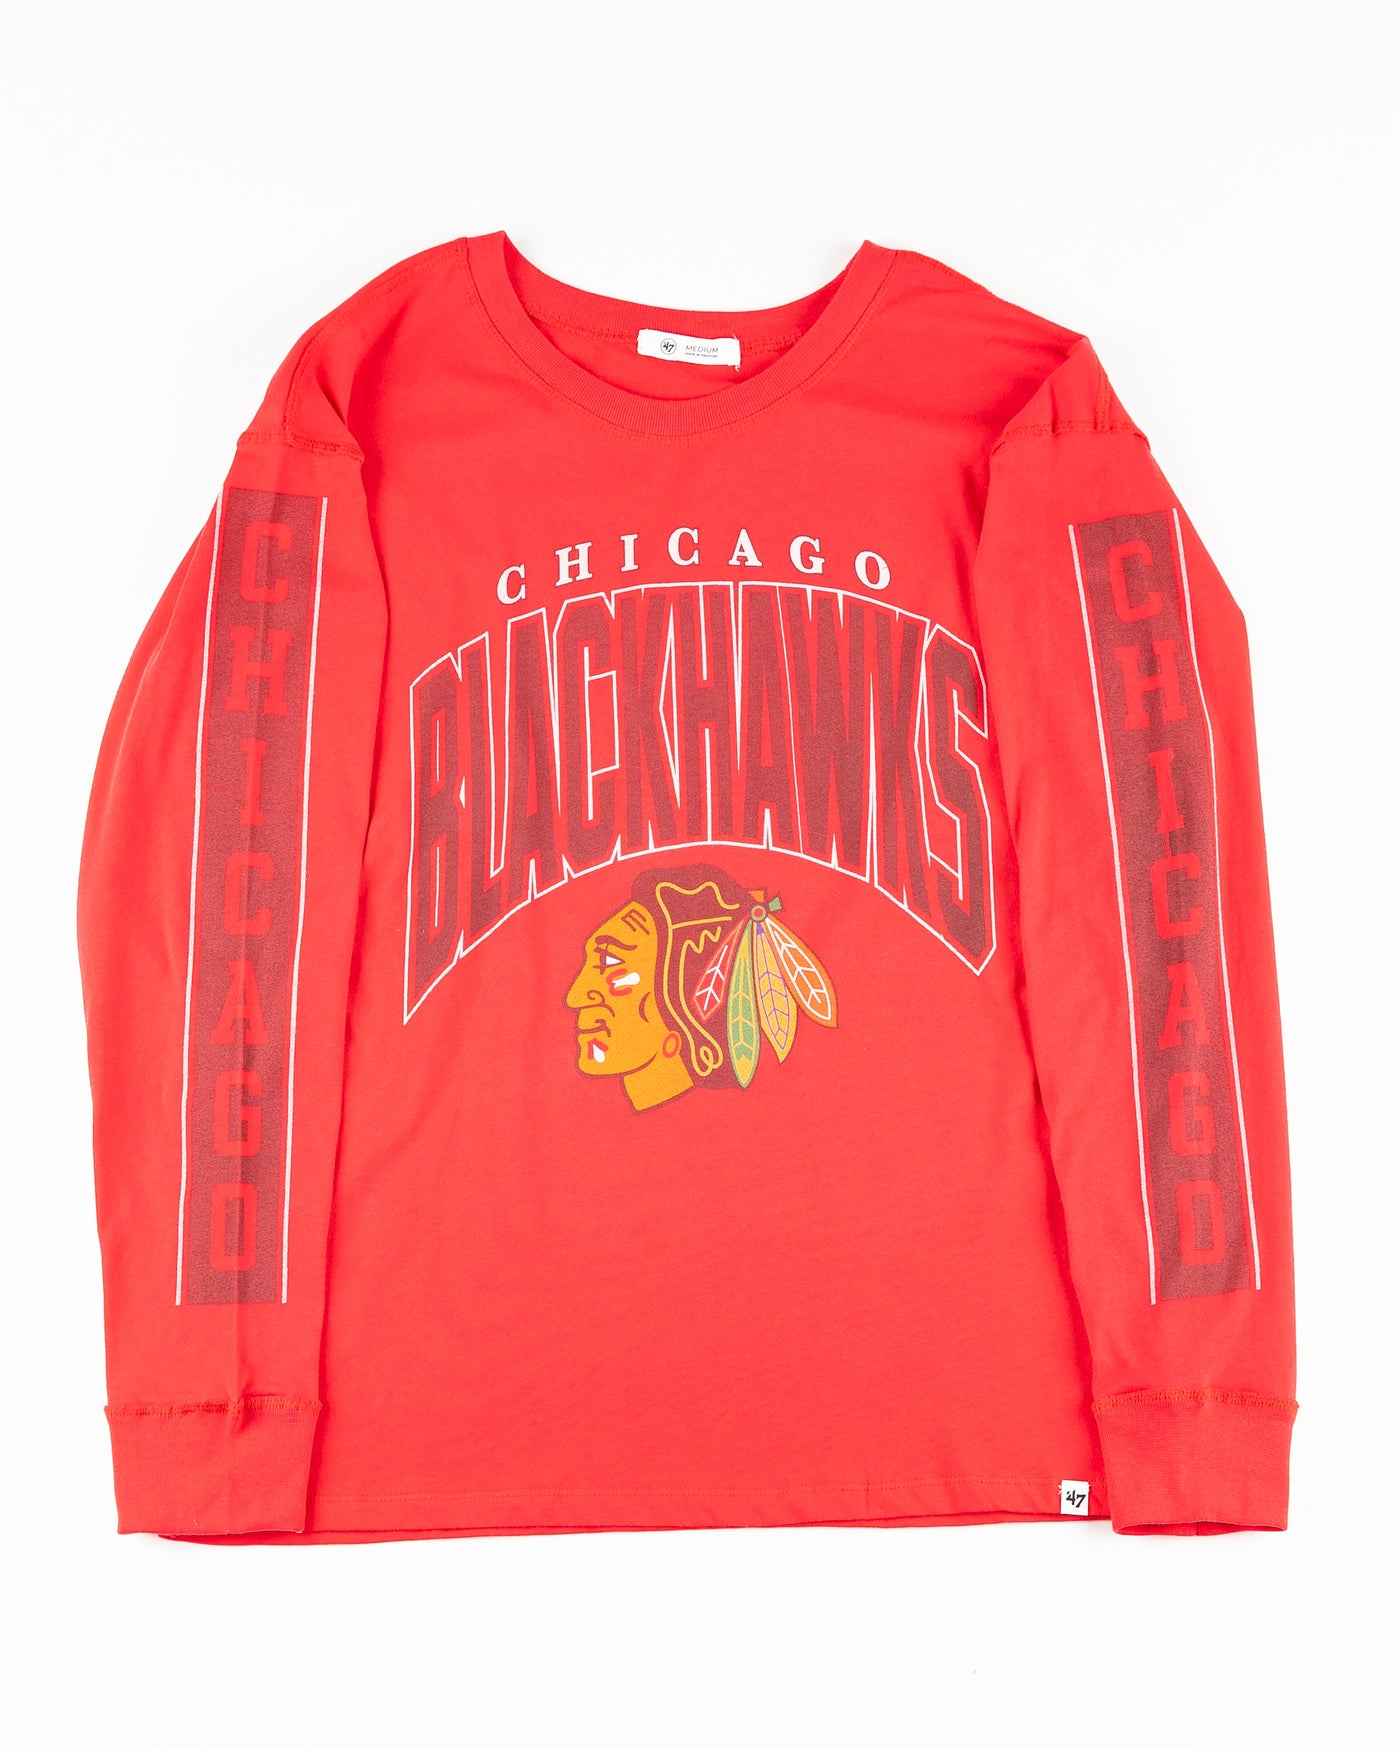 red '47 brand long sleeve tee with Chicago Blackhawks graphics on front and sleeves - front lay flat